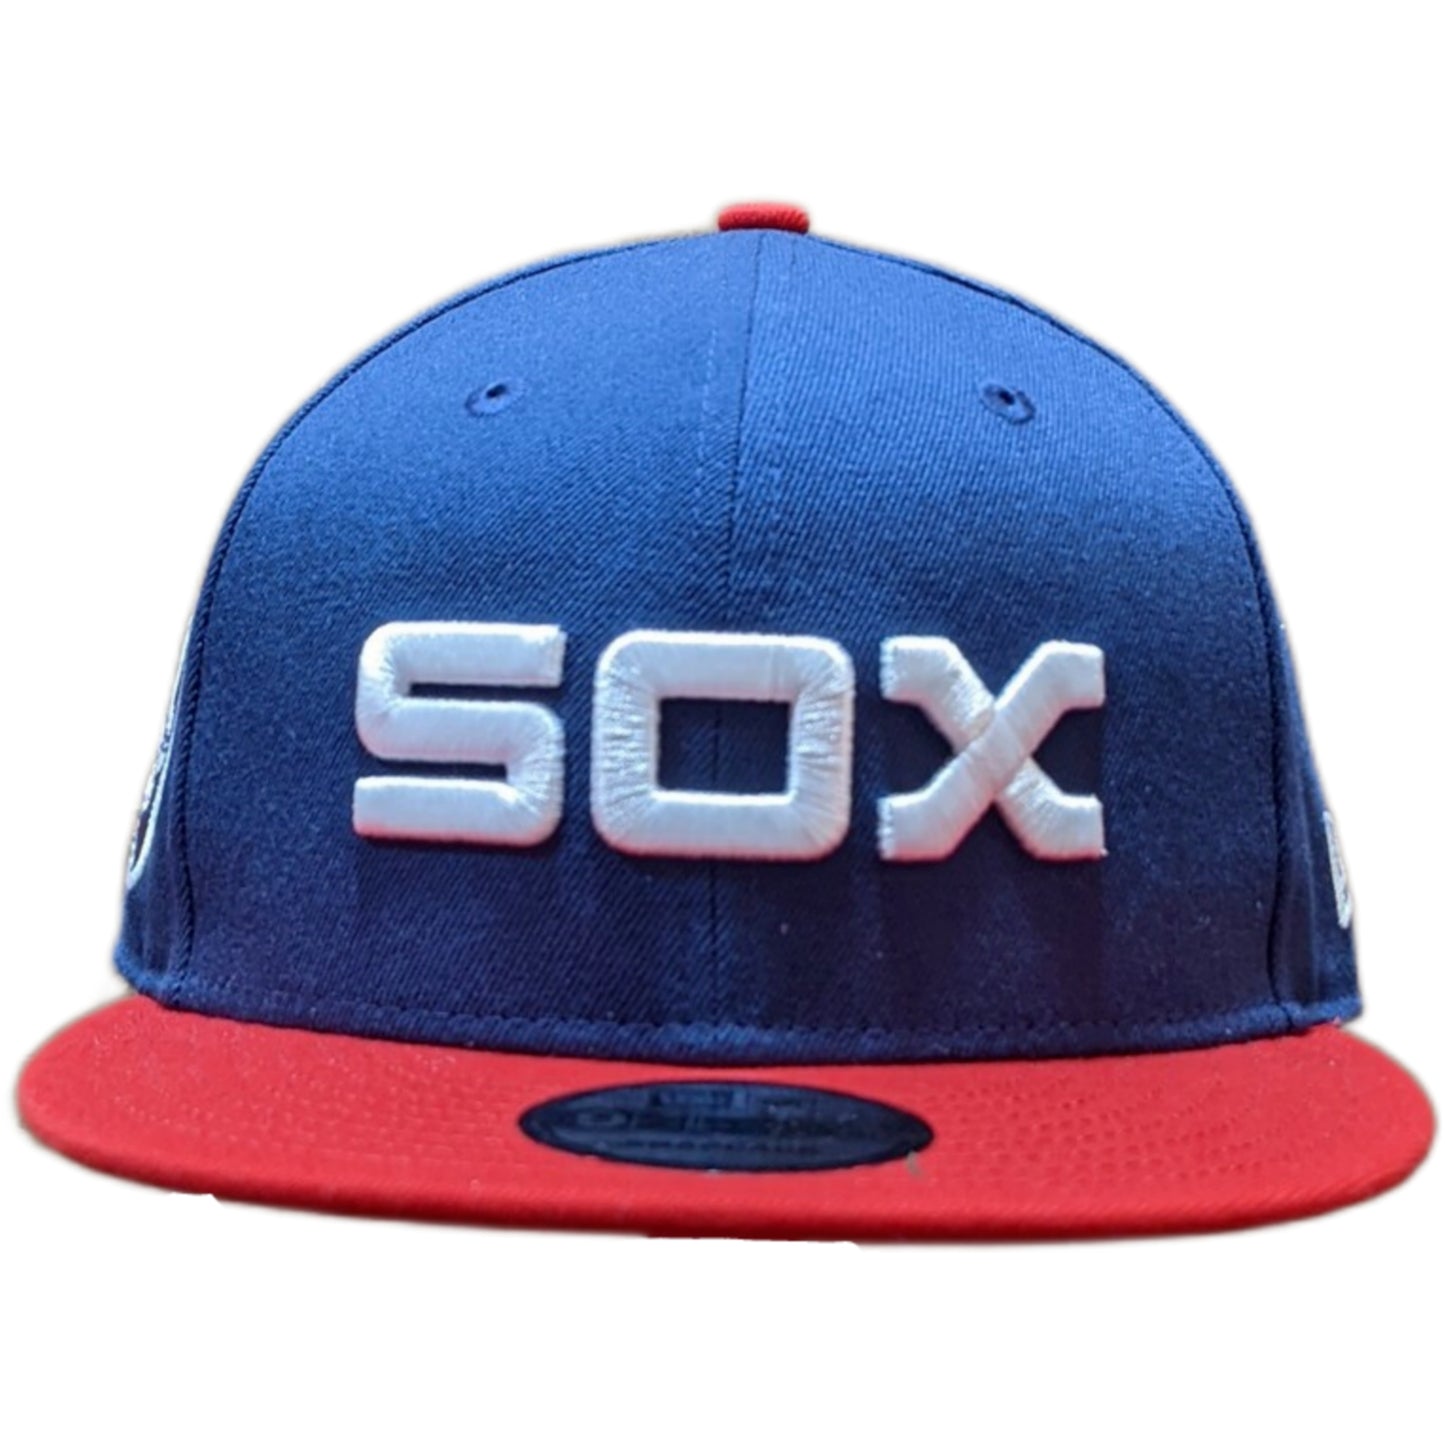 Mens Chicago White Sox New Era 1983 Road Cooperstown Collection 2 Tone Red & Navy 75th Anniversary of Comiskey Park 9FIFTY Snapback Hat